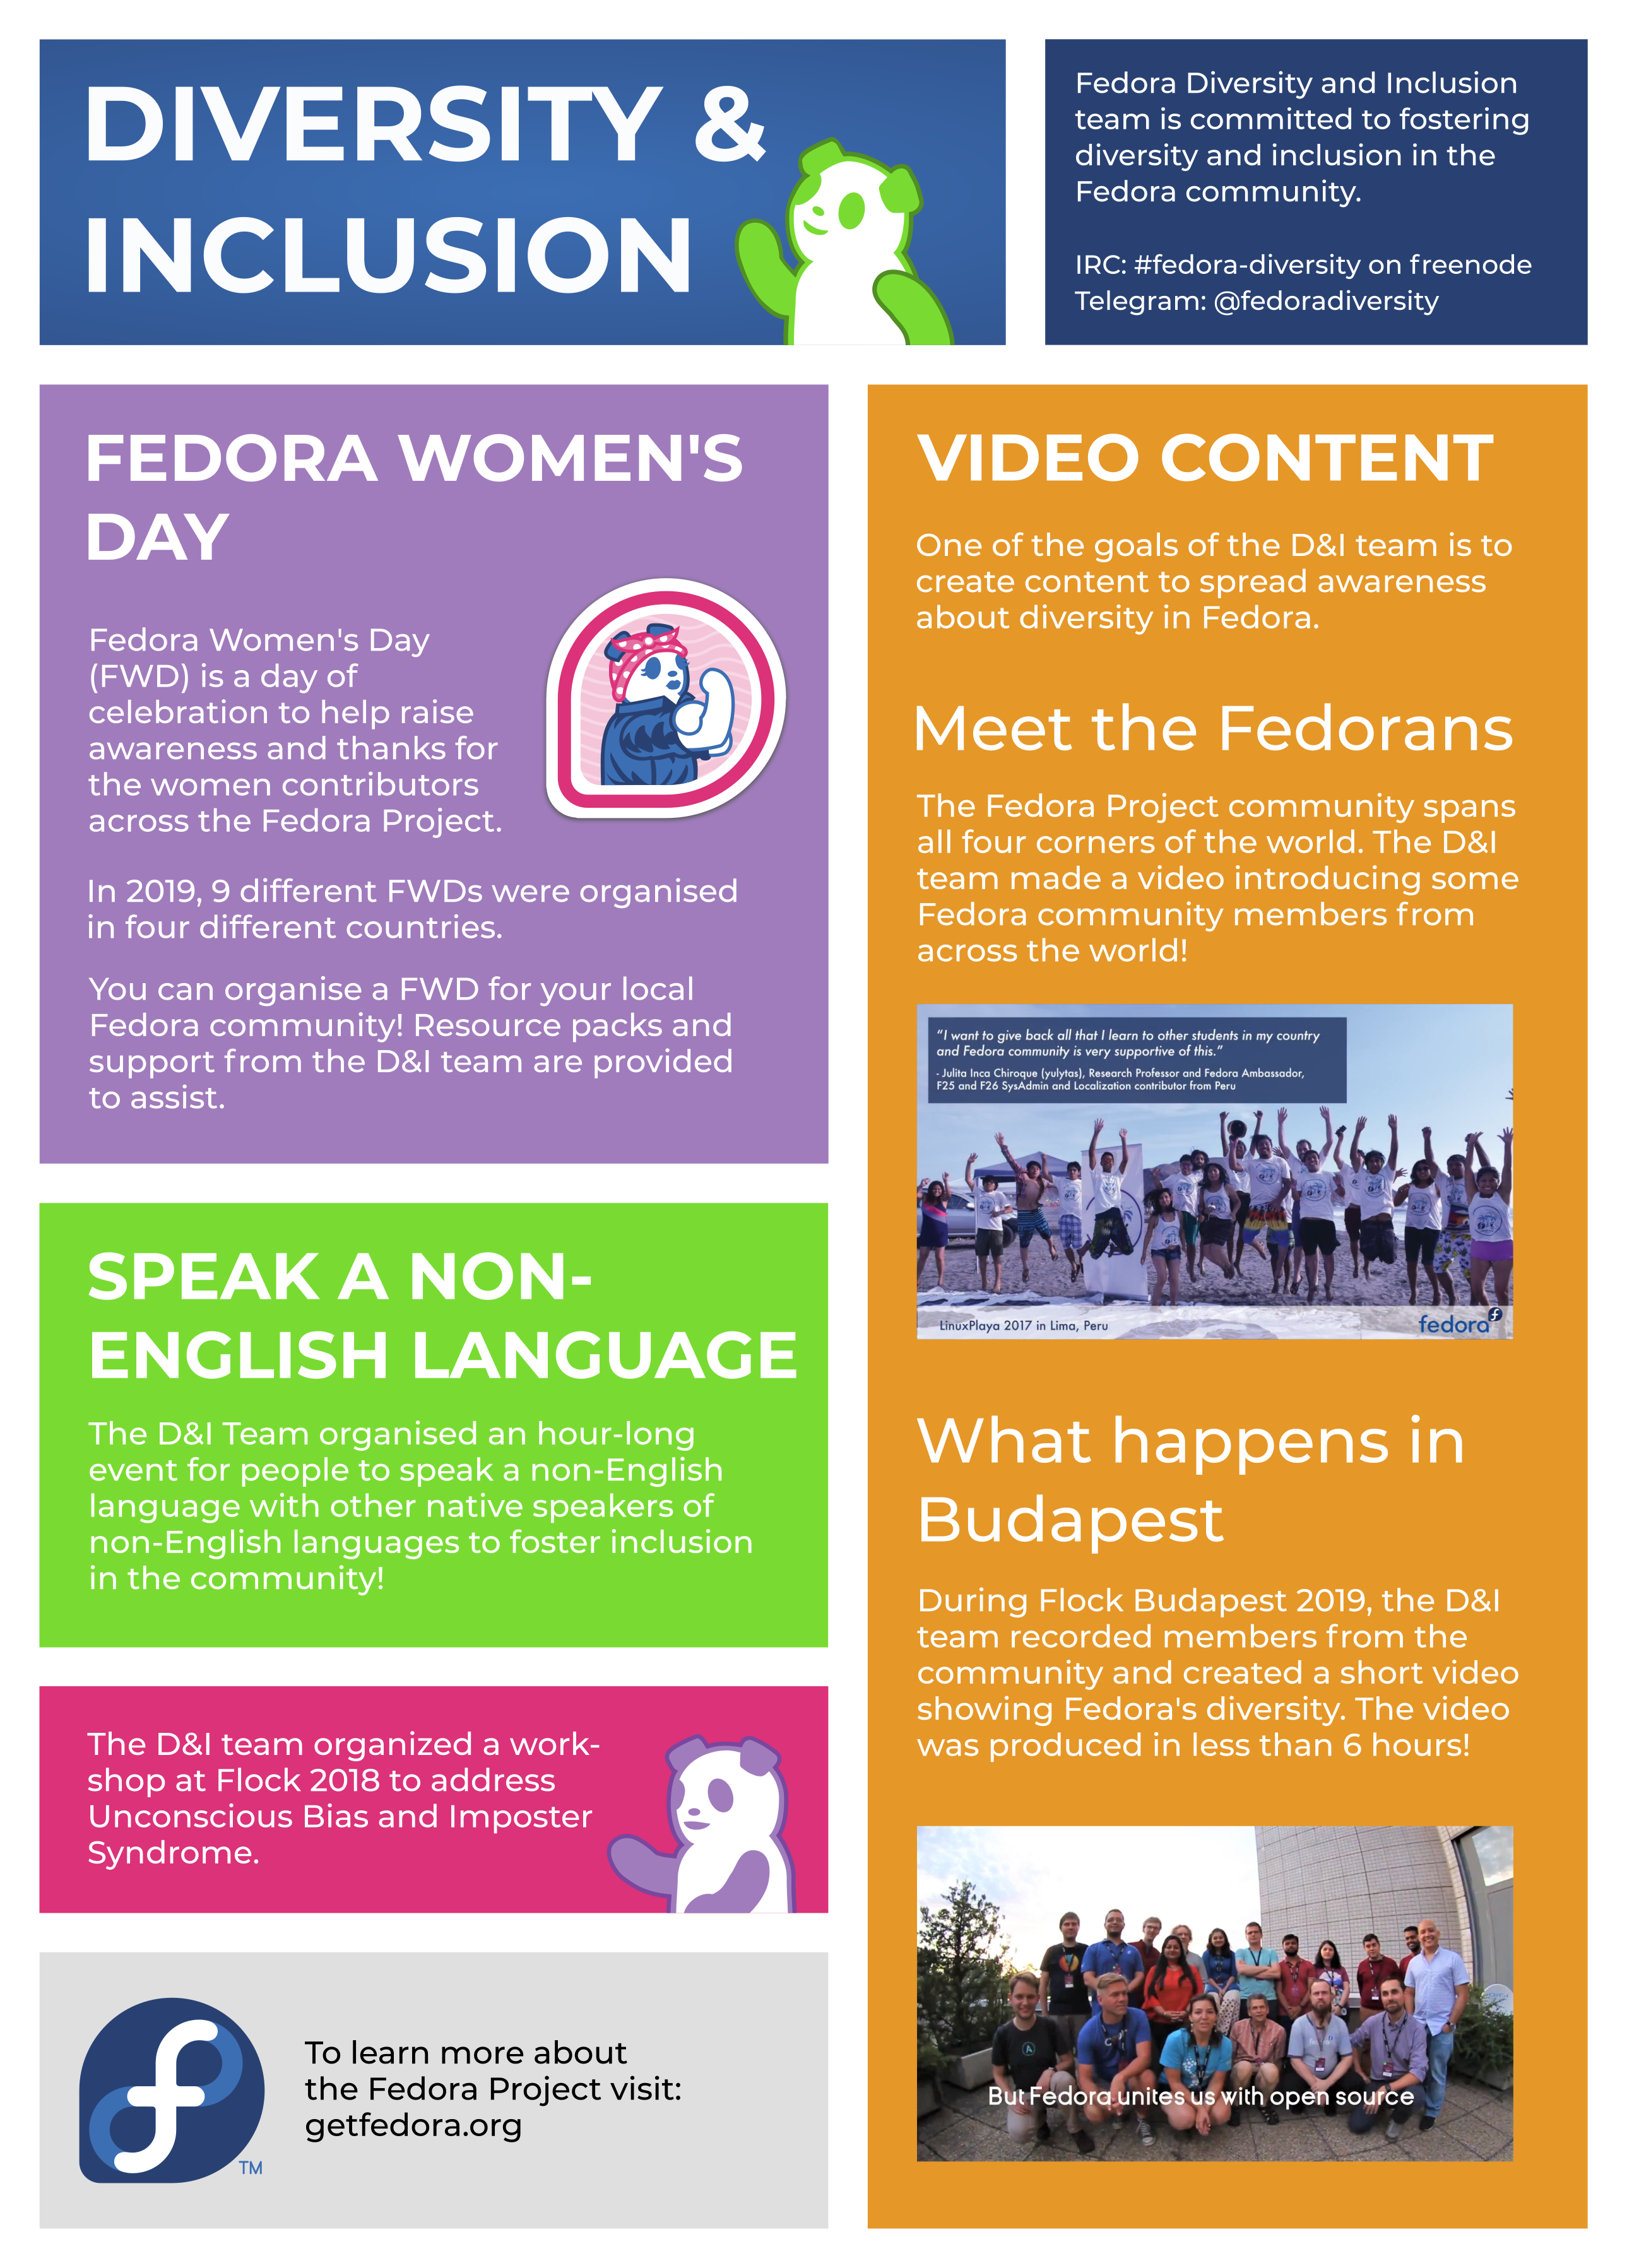 Infographic with statistics about Fedora Women’s Day since 2016 (now expanded to Fedora Week of Diversity). Created by Smera Goel.